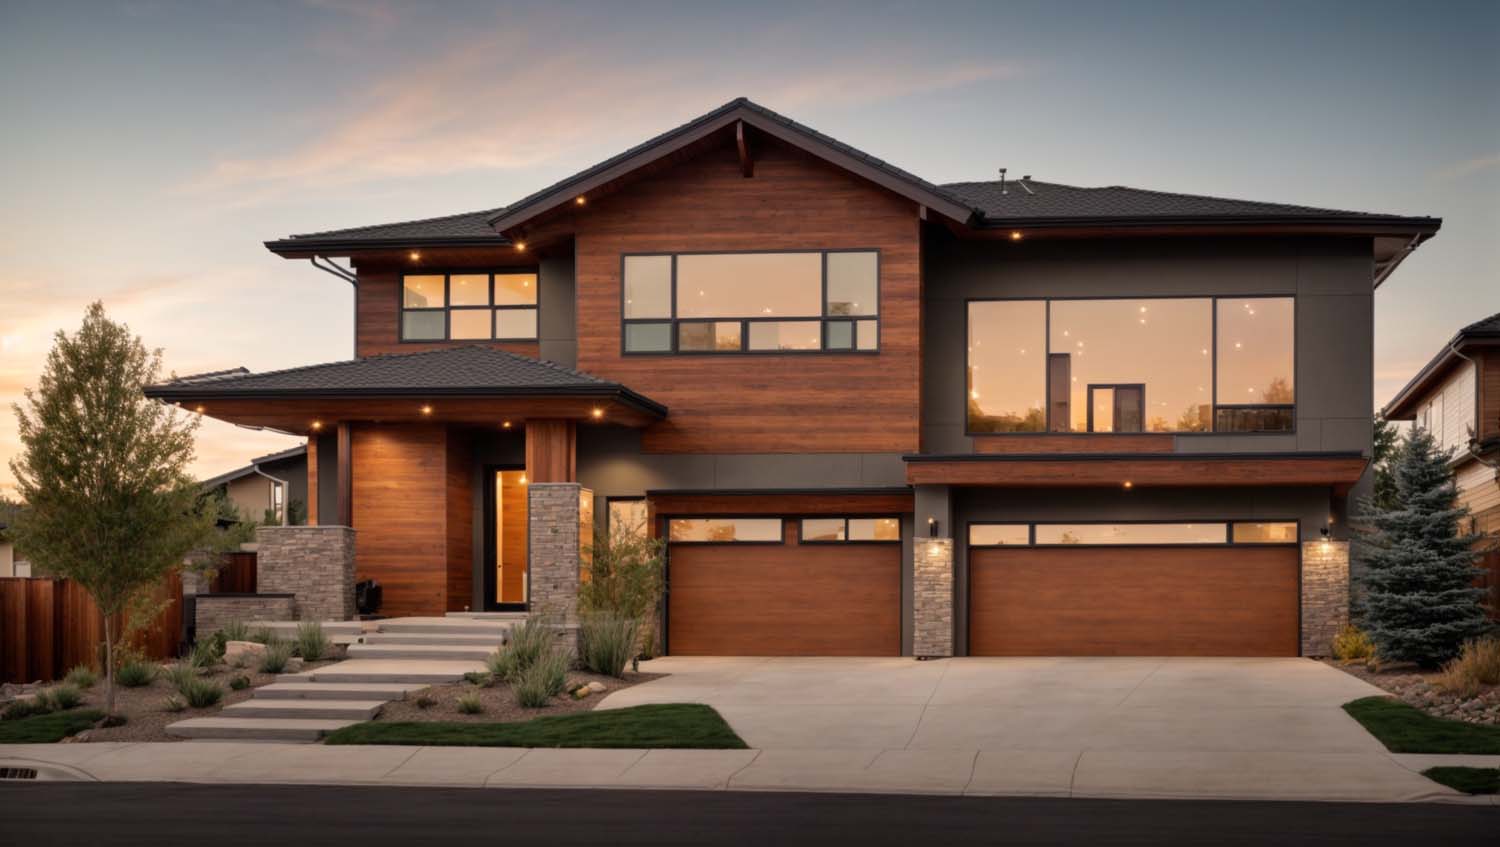 Boulder, the hub of skilled vertical plank siding in Colorado.